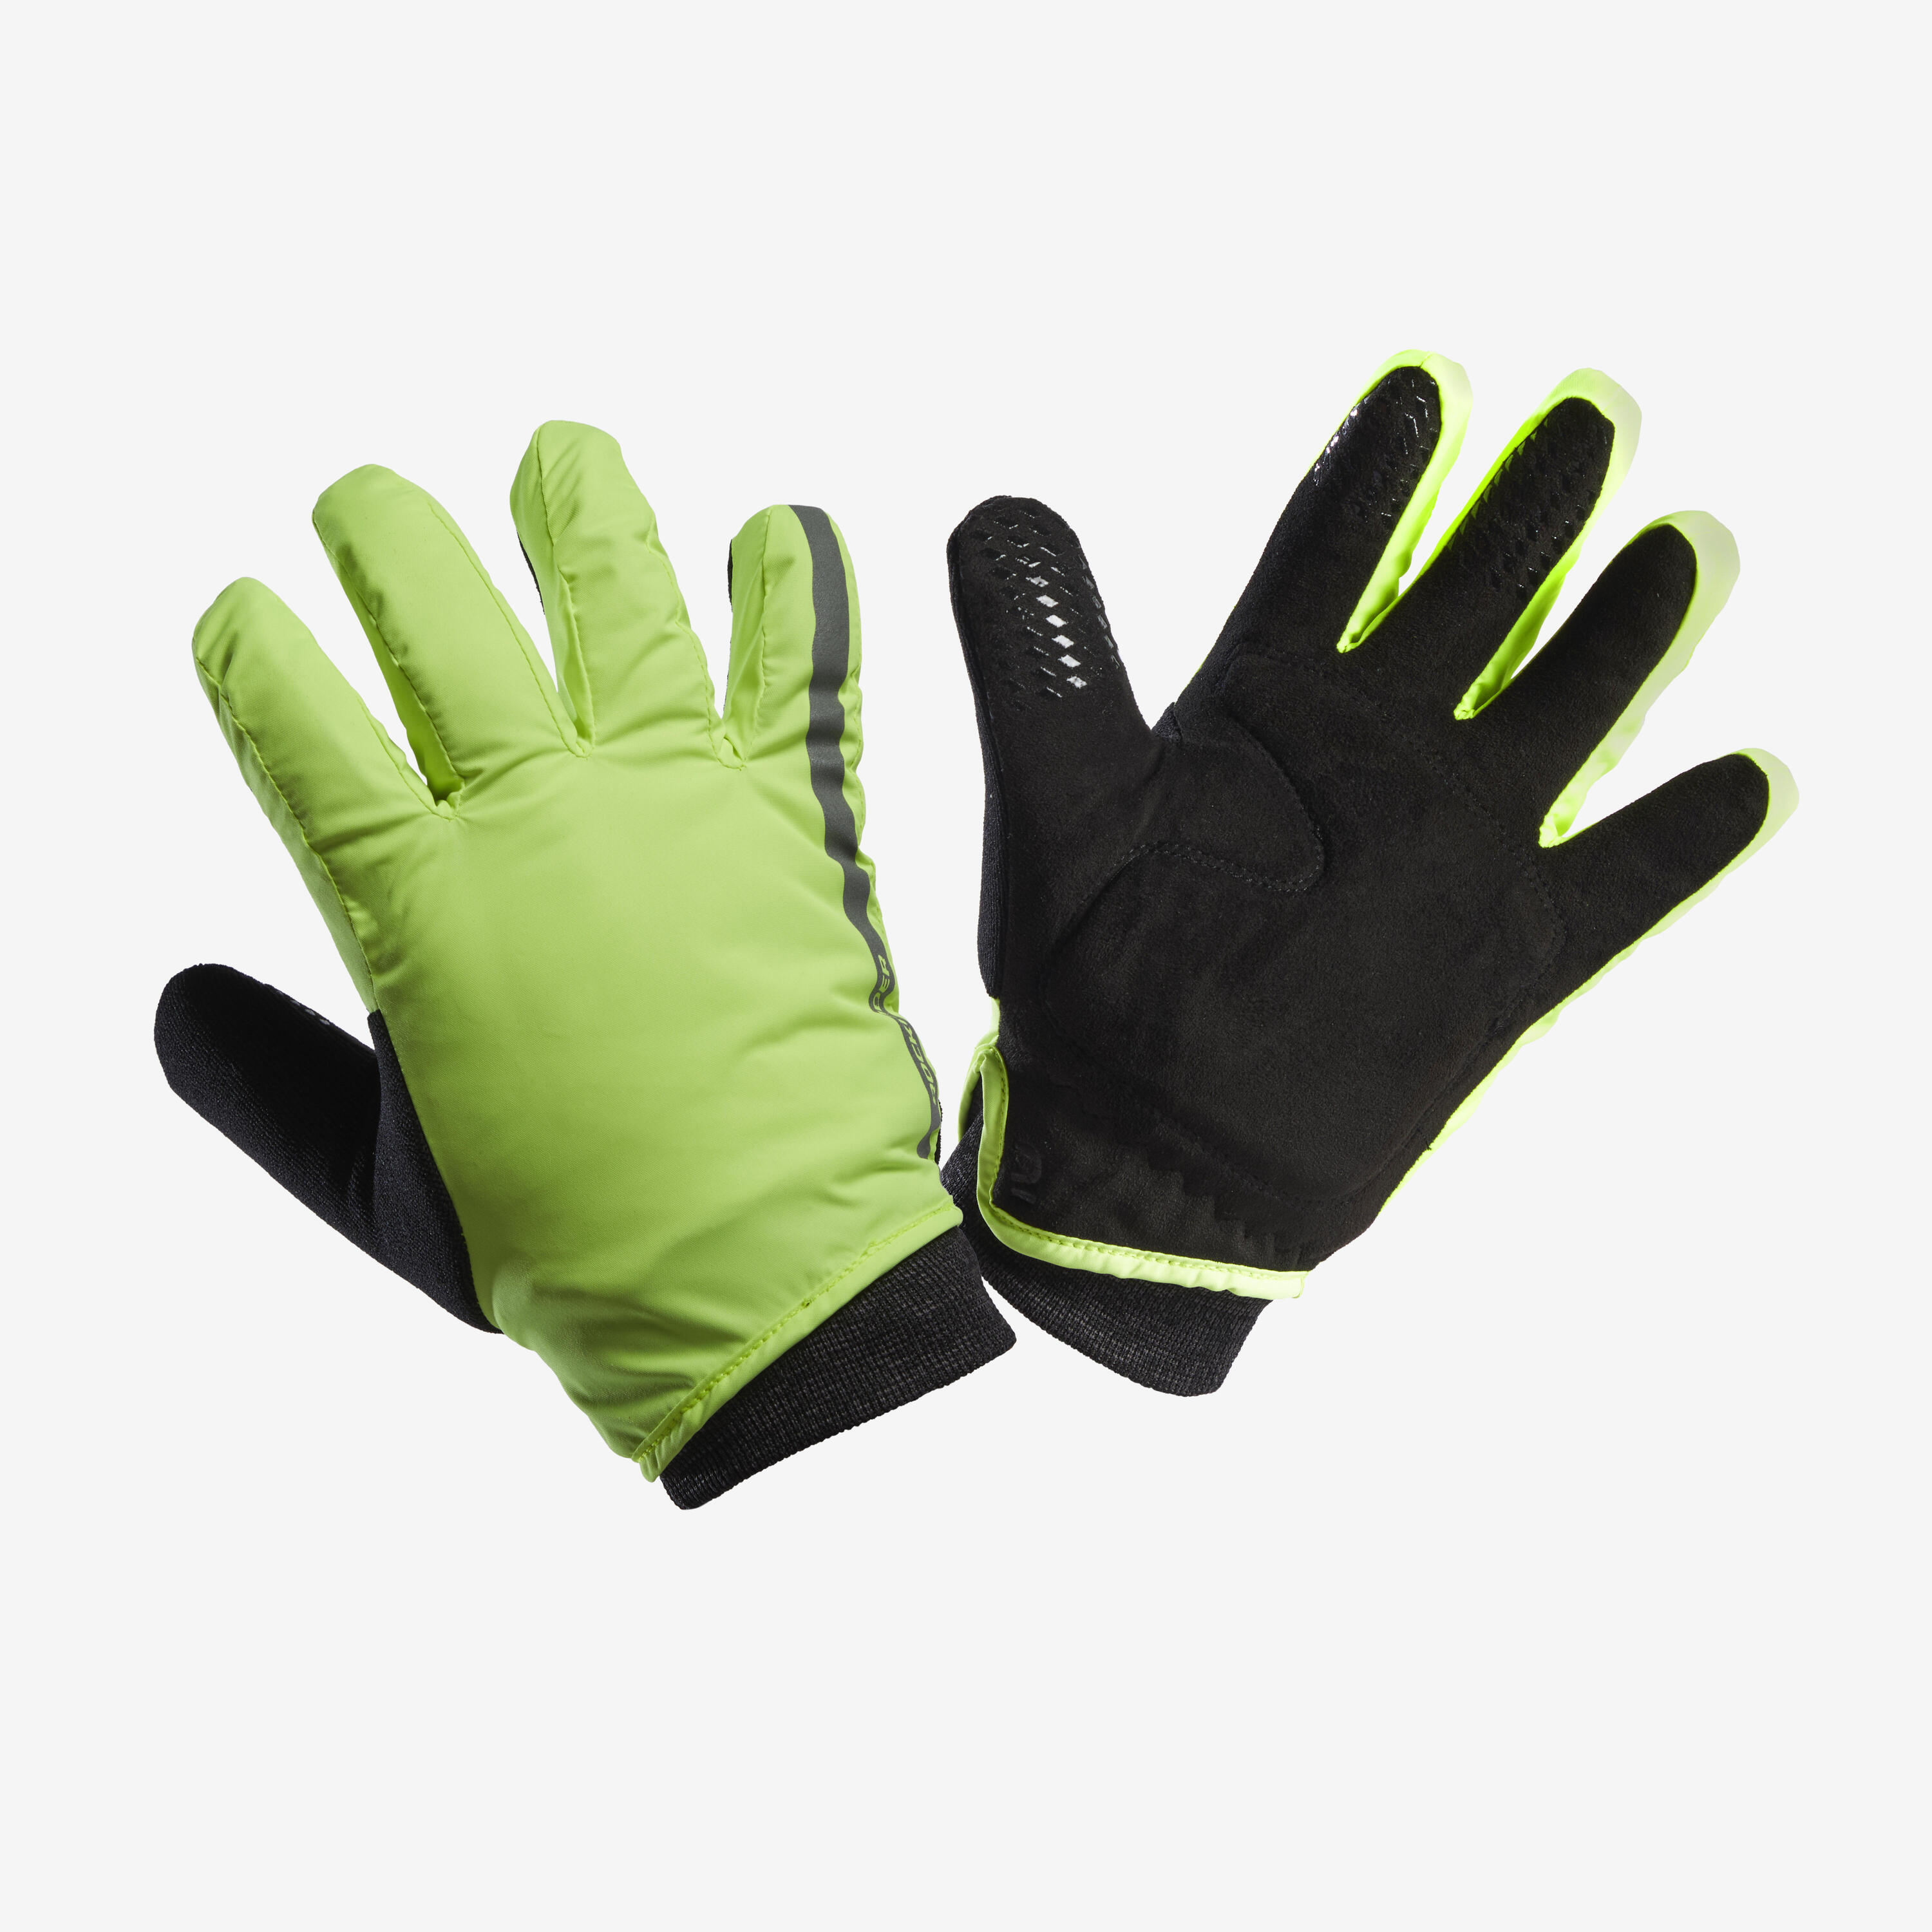 Kids' Winter Cycling Gloves 500 - Neon Yellow 1/5